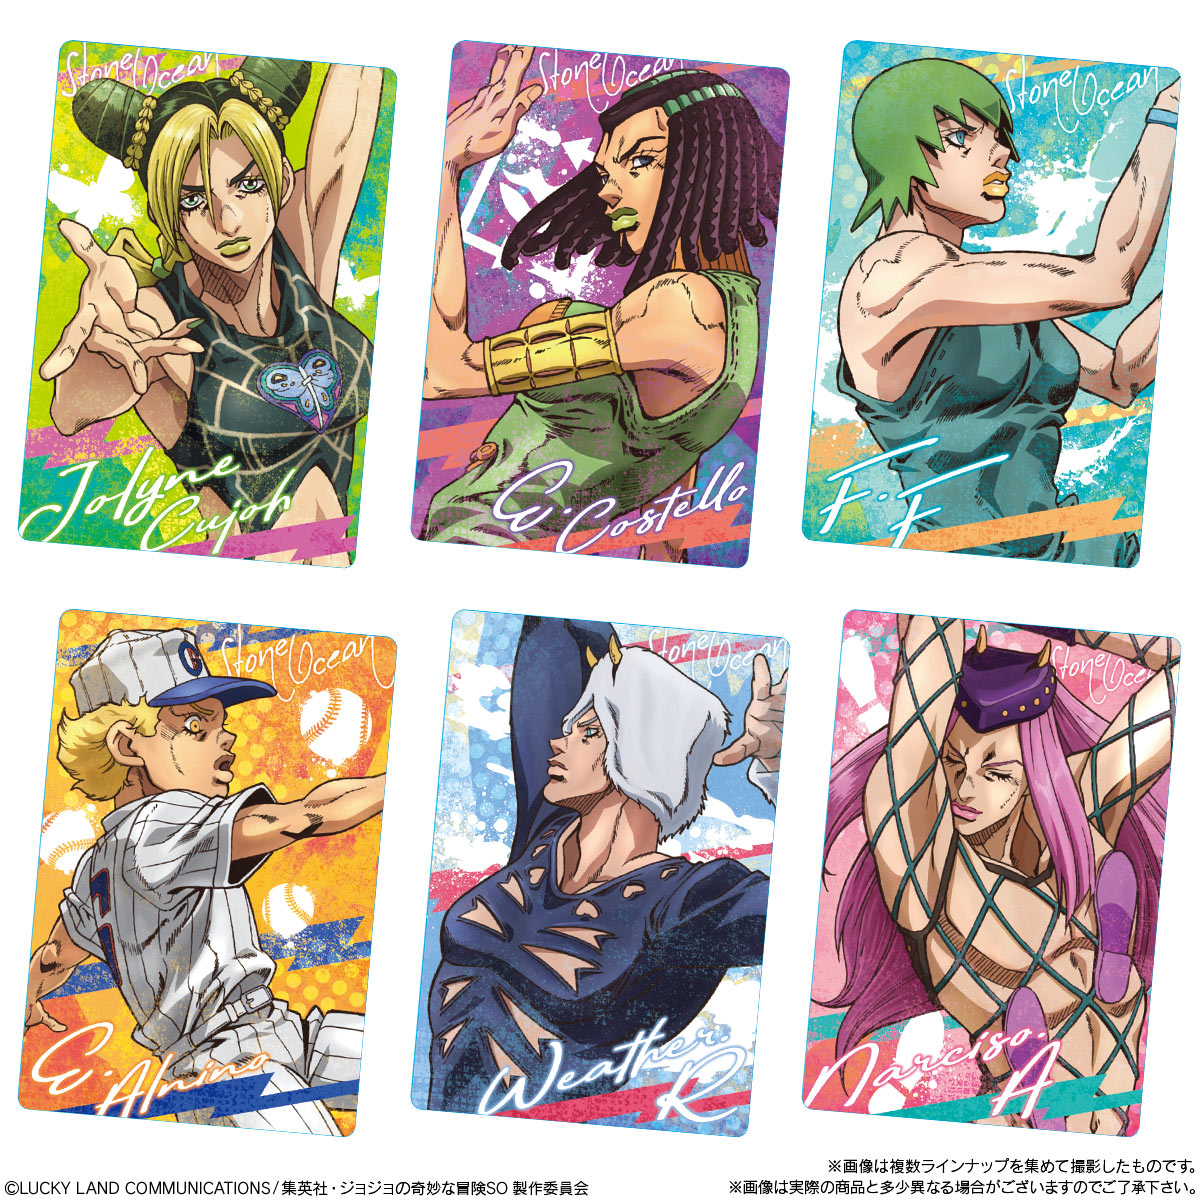 JOJO WORLD Re-Opens in April 2022 With New Stone Ocean Products